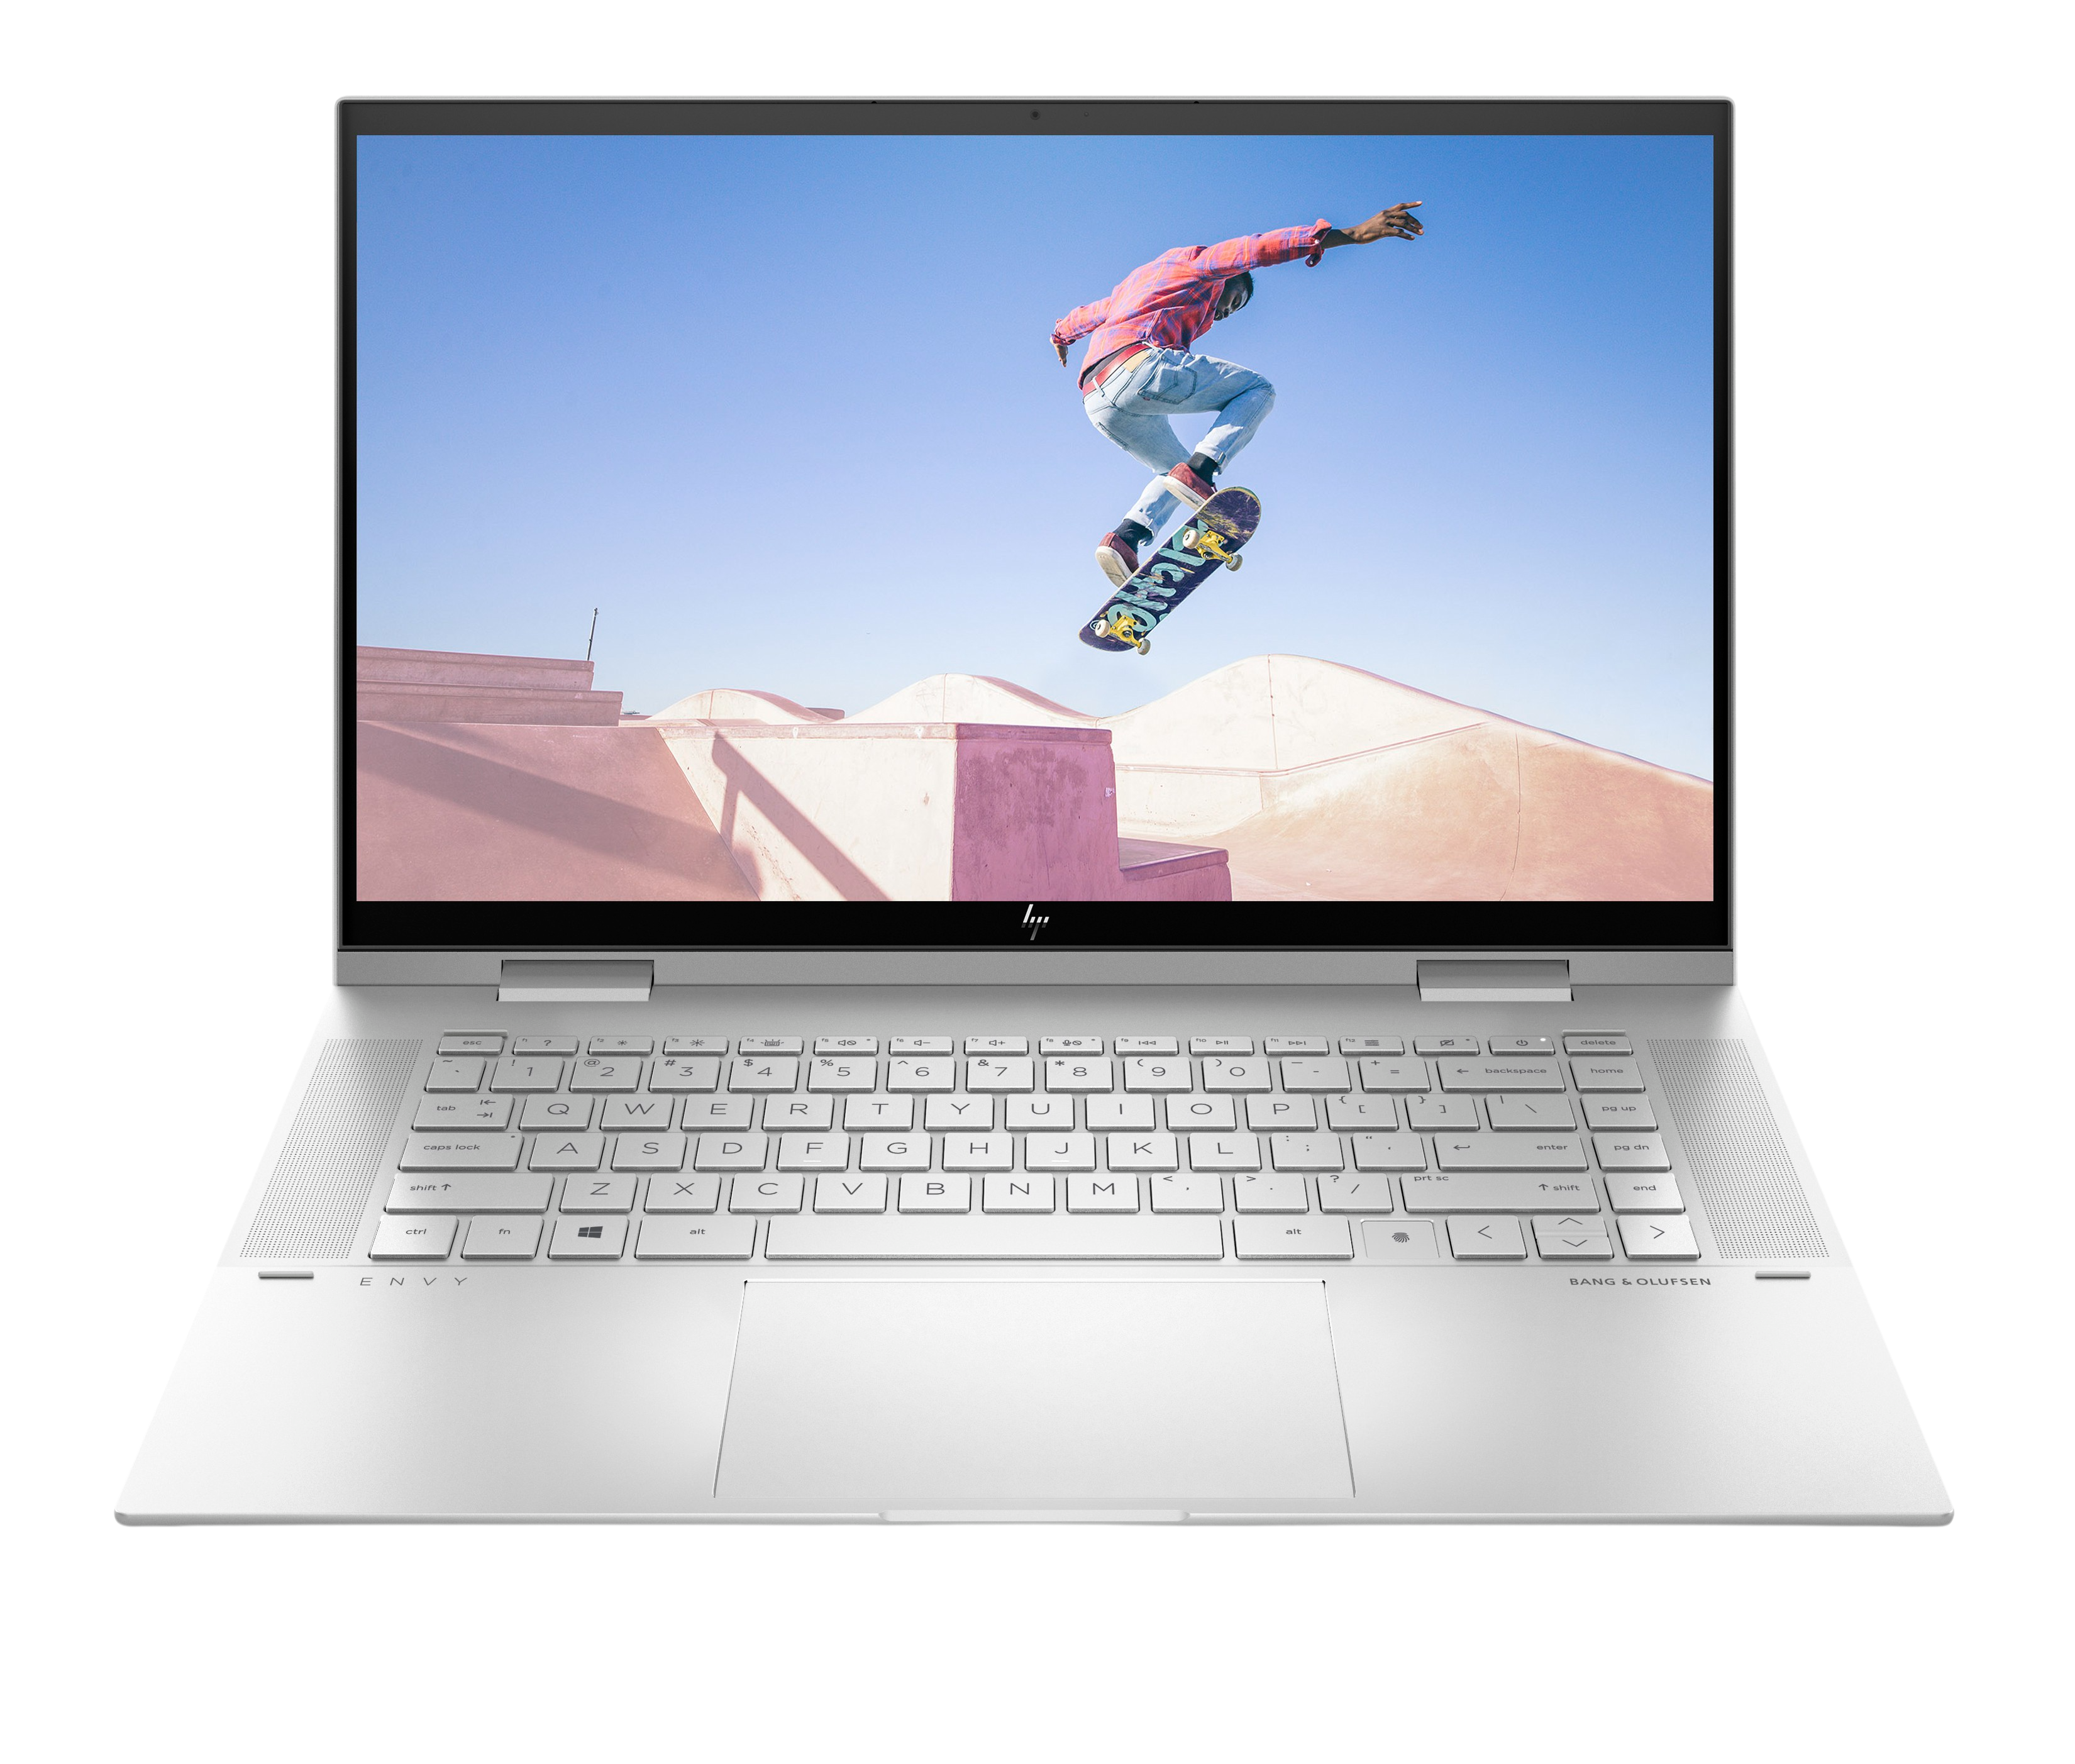 Rent Dell XPS 15 9520 Laptop - Intel® Core™ i7-12700H - 16GB - 512GB SSD -  Intel® Iris® Xe Graphics from €124.90 per month